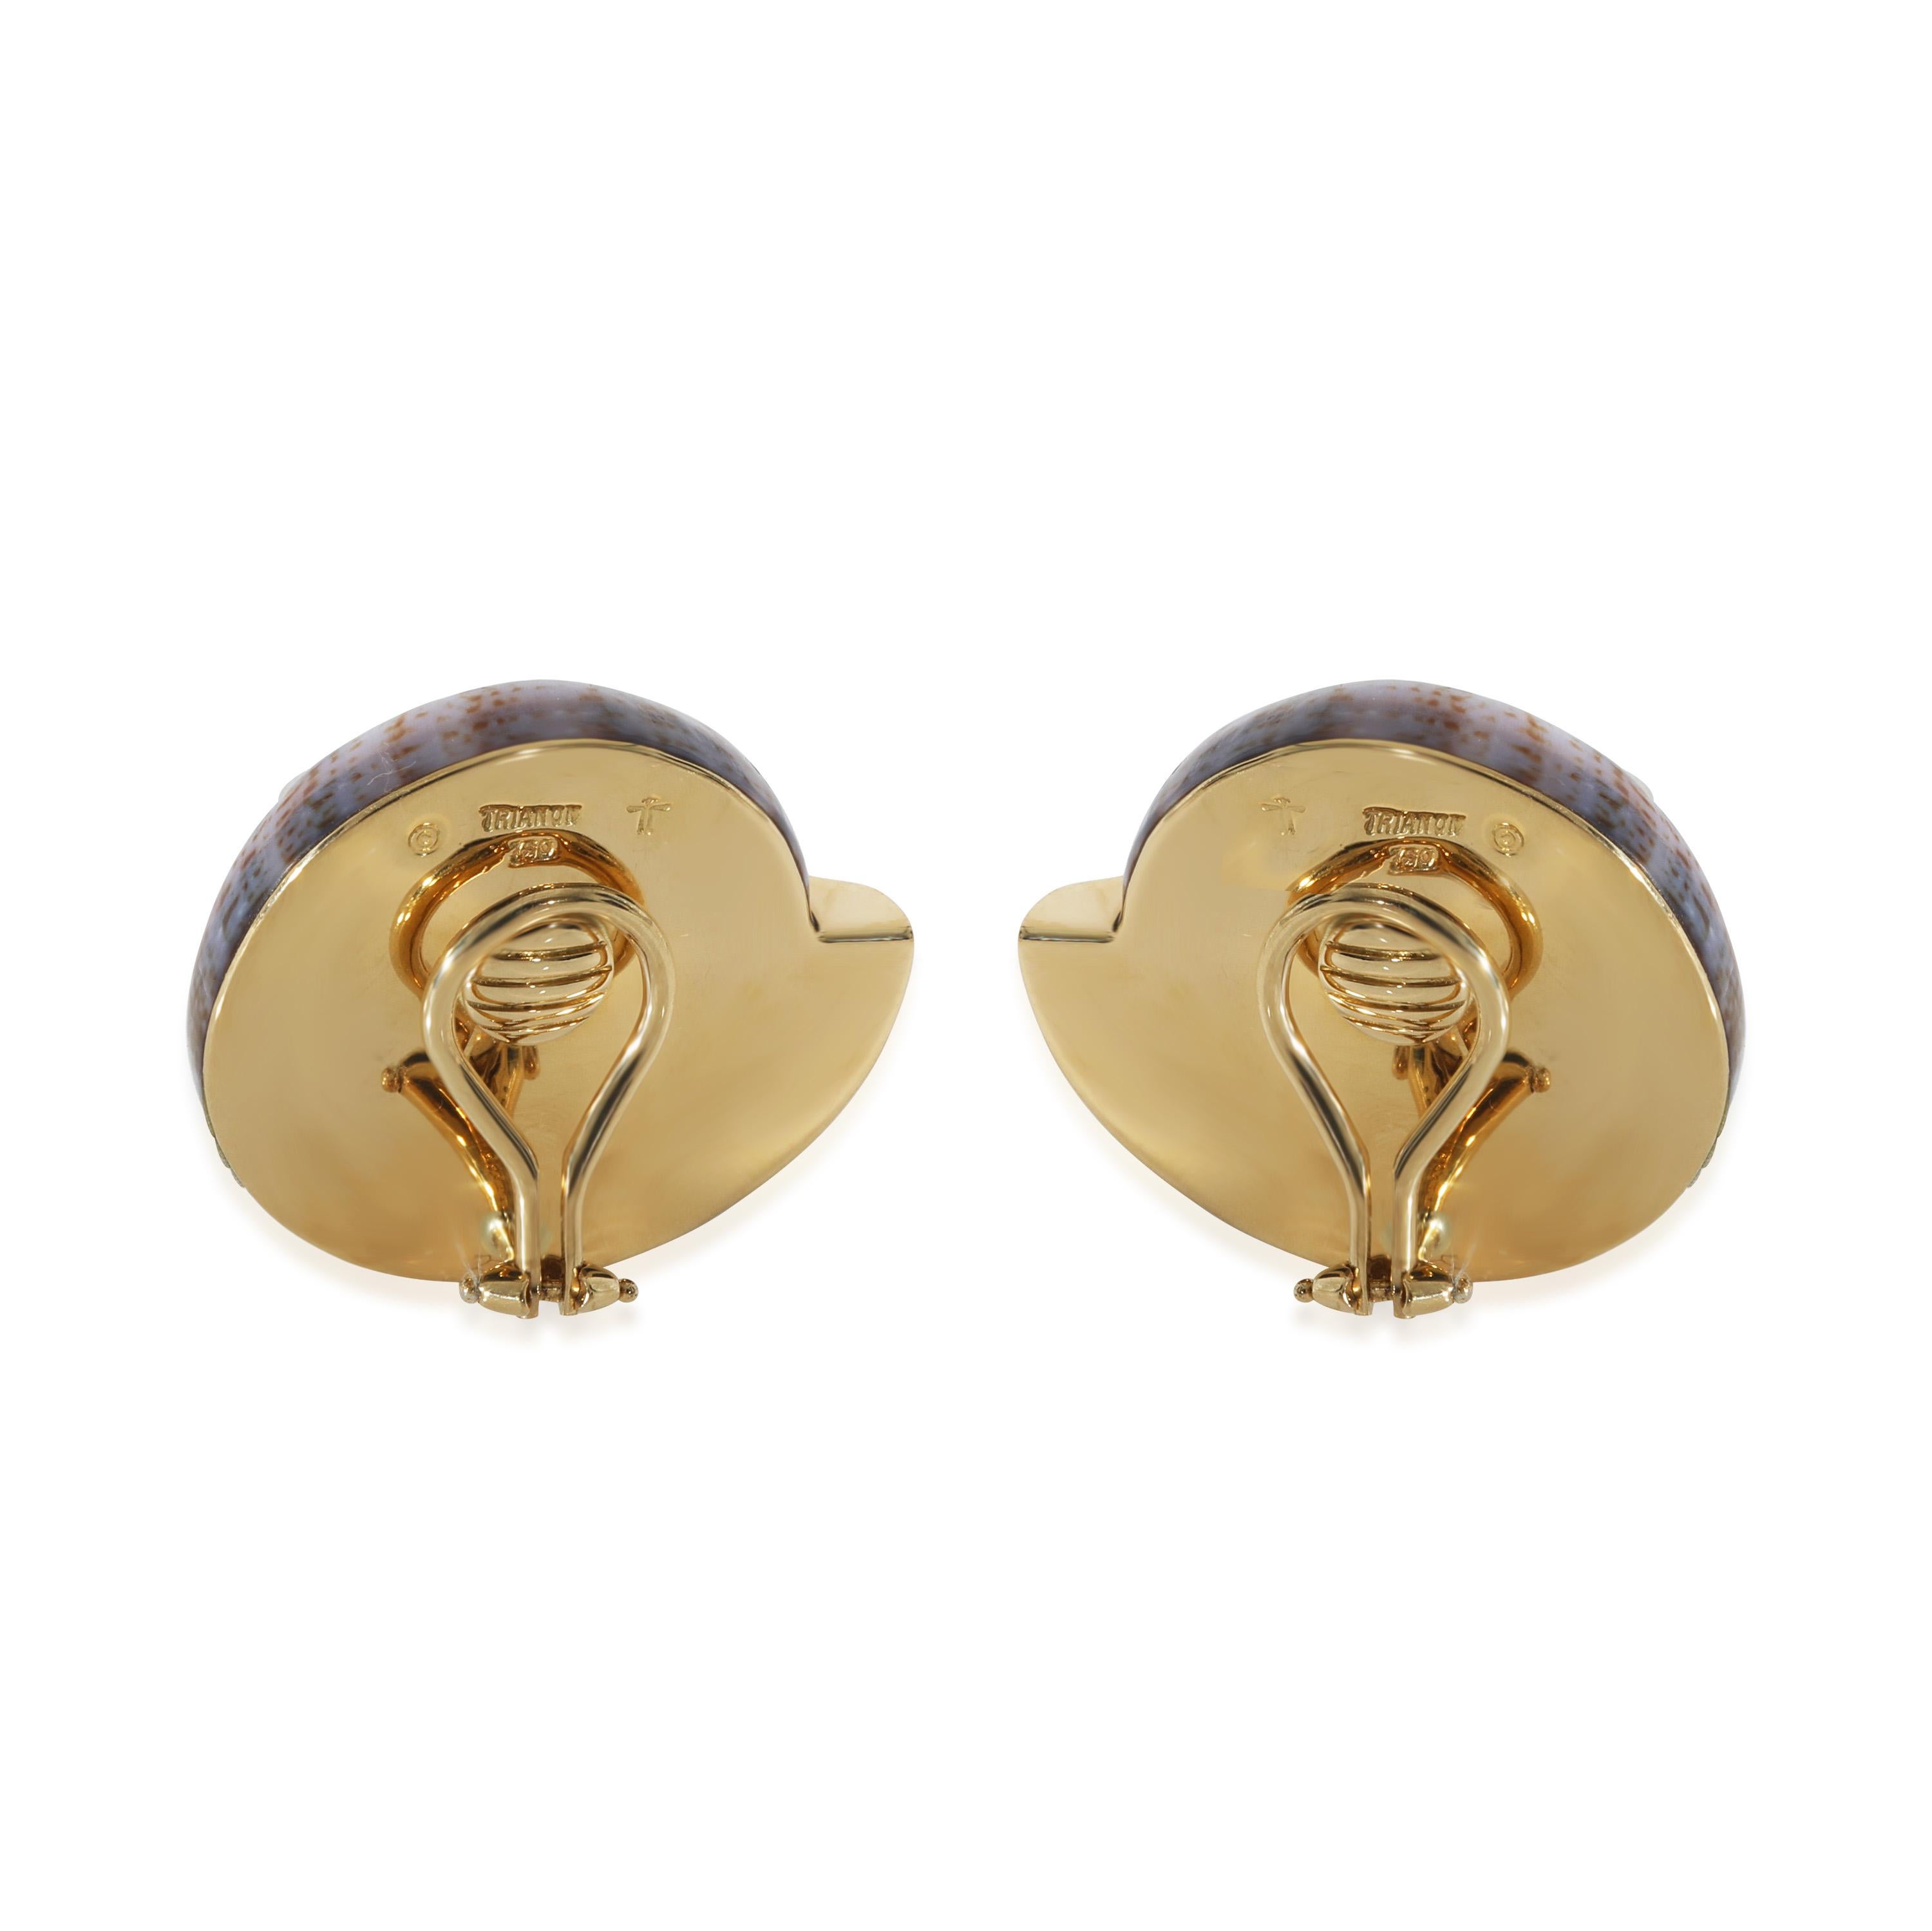 Trianon (Seaman Shepps) Mabe Pearl, Amethyst & Shell Earring in 18k Yellow Gold

PRIMARY DETAILS
SKU: 130131
Listing Title: Trianon (Seaman Shepps) Mabe Pearl, Amethyst & Shell Earring in 18k Yellow Gold
Condition Description: Retails for 4600 USD.